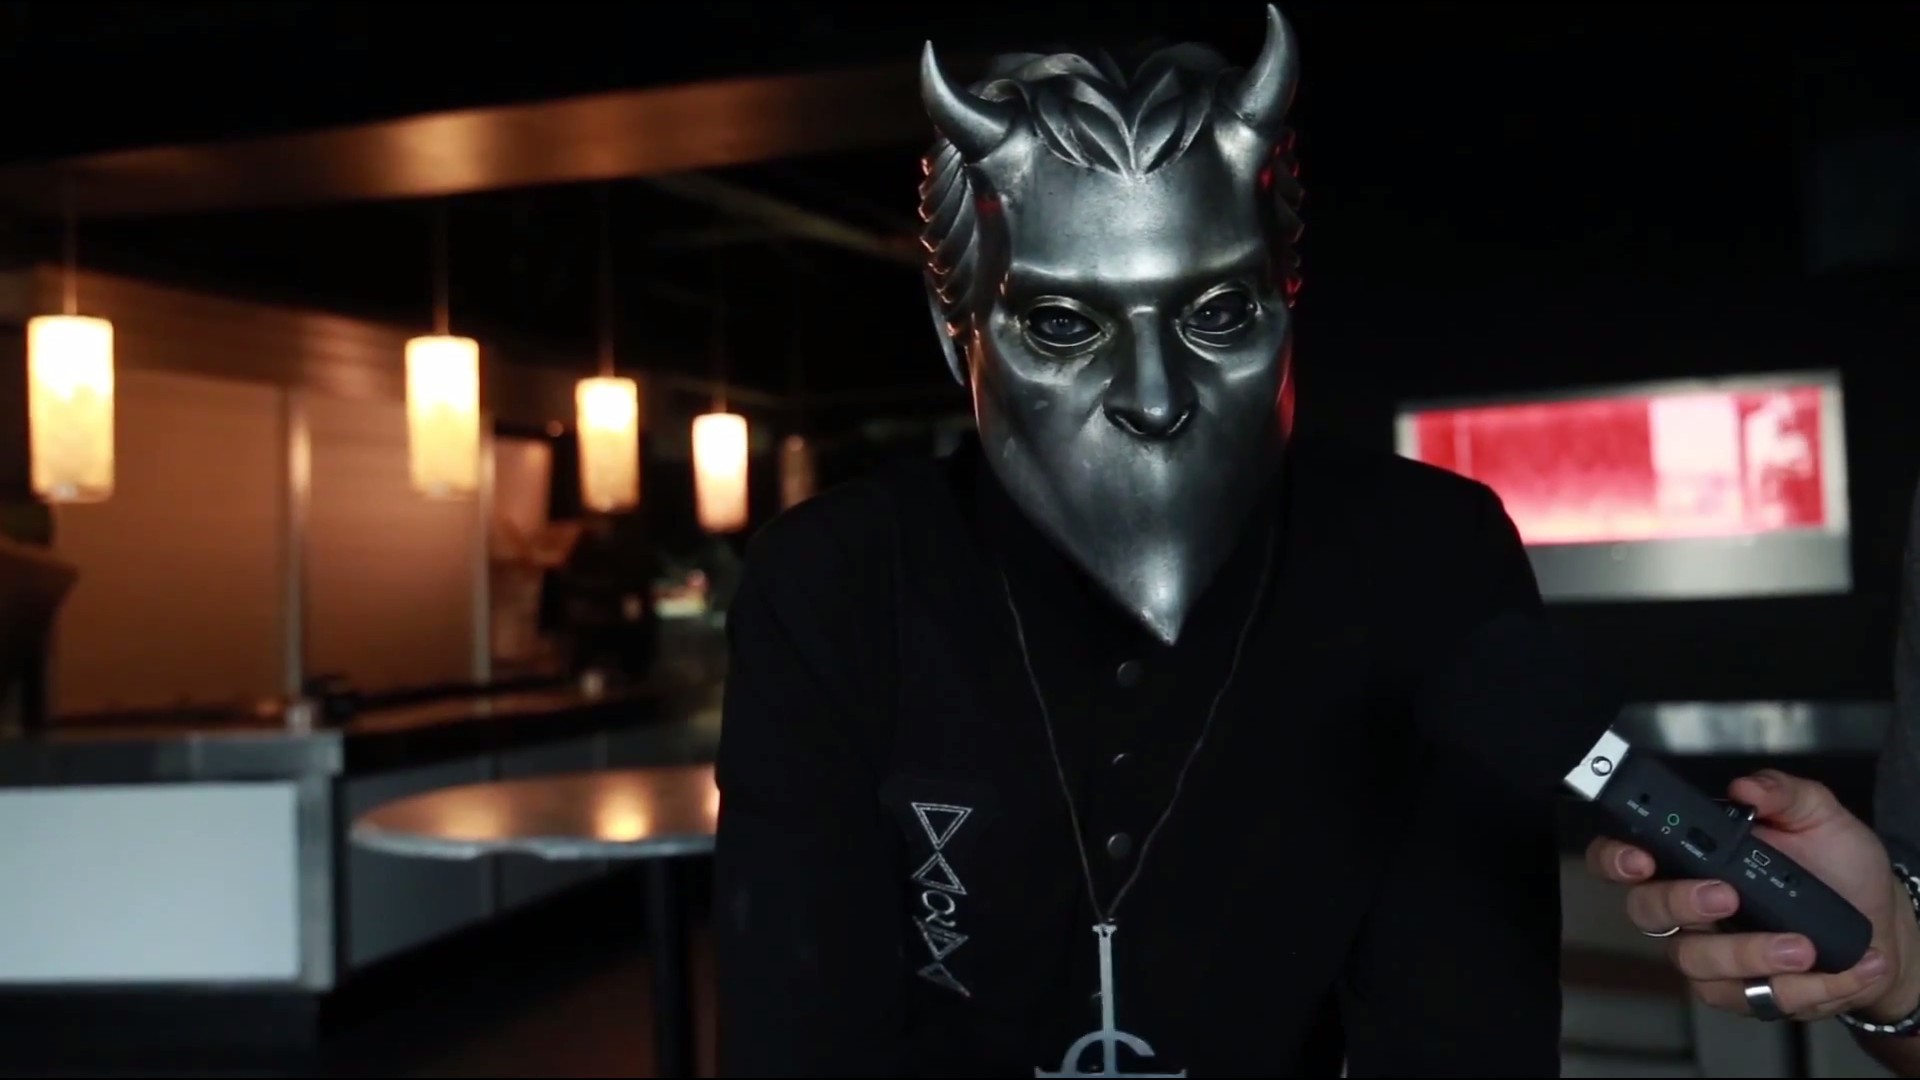 Ghost Band Mask Live In Limbo Interviews Ghost Children Of Ghost